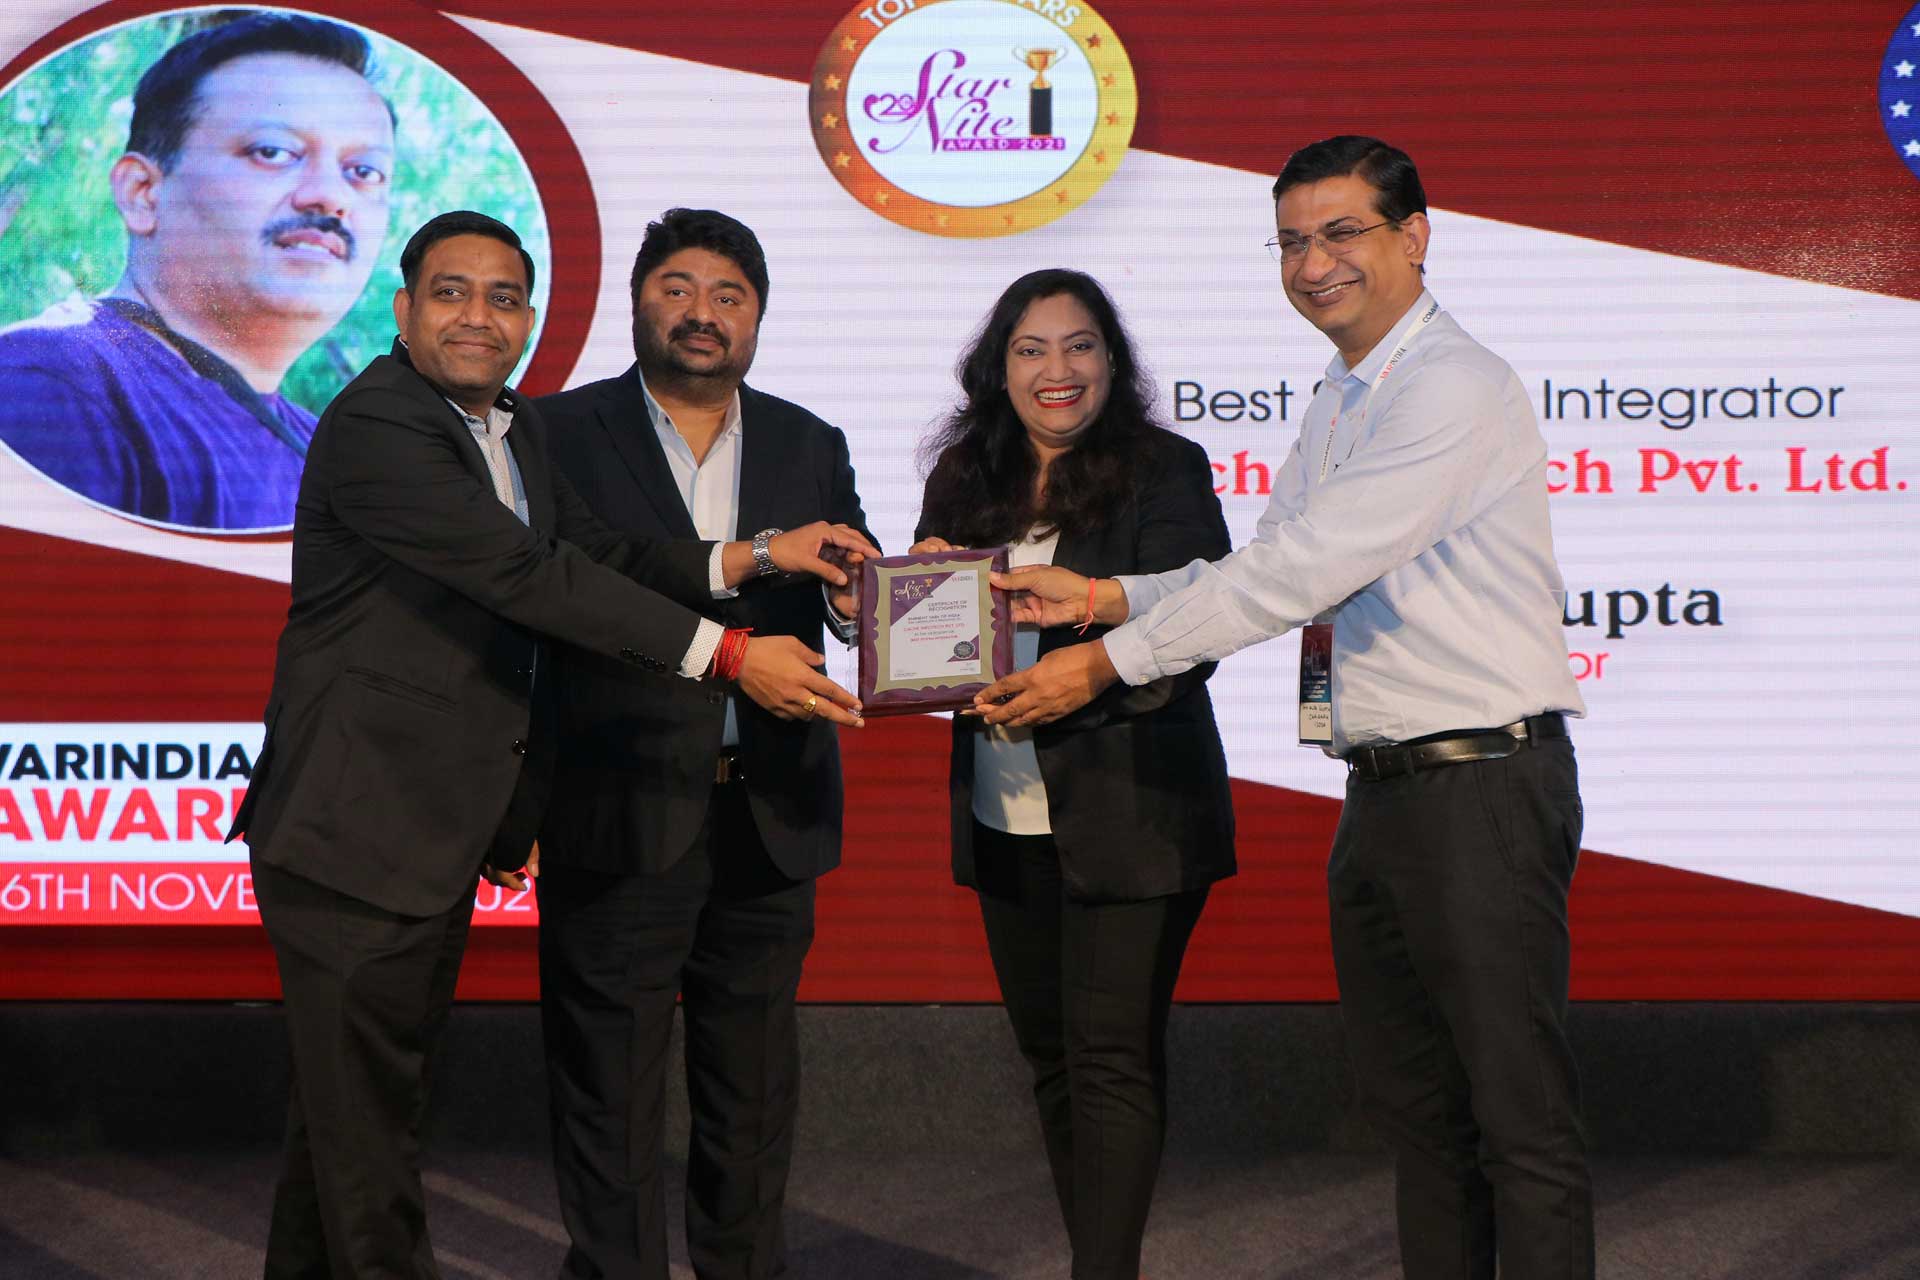 Best System Integrator Award goes to Cache Infotech Pvt Ltd.,  at 20th Star Nite Awards 2021